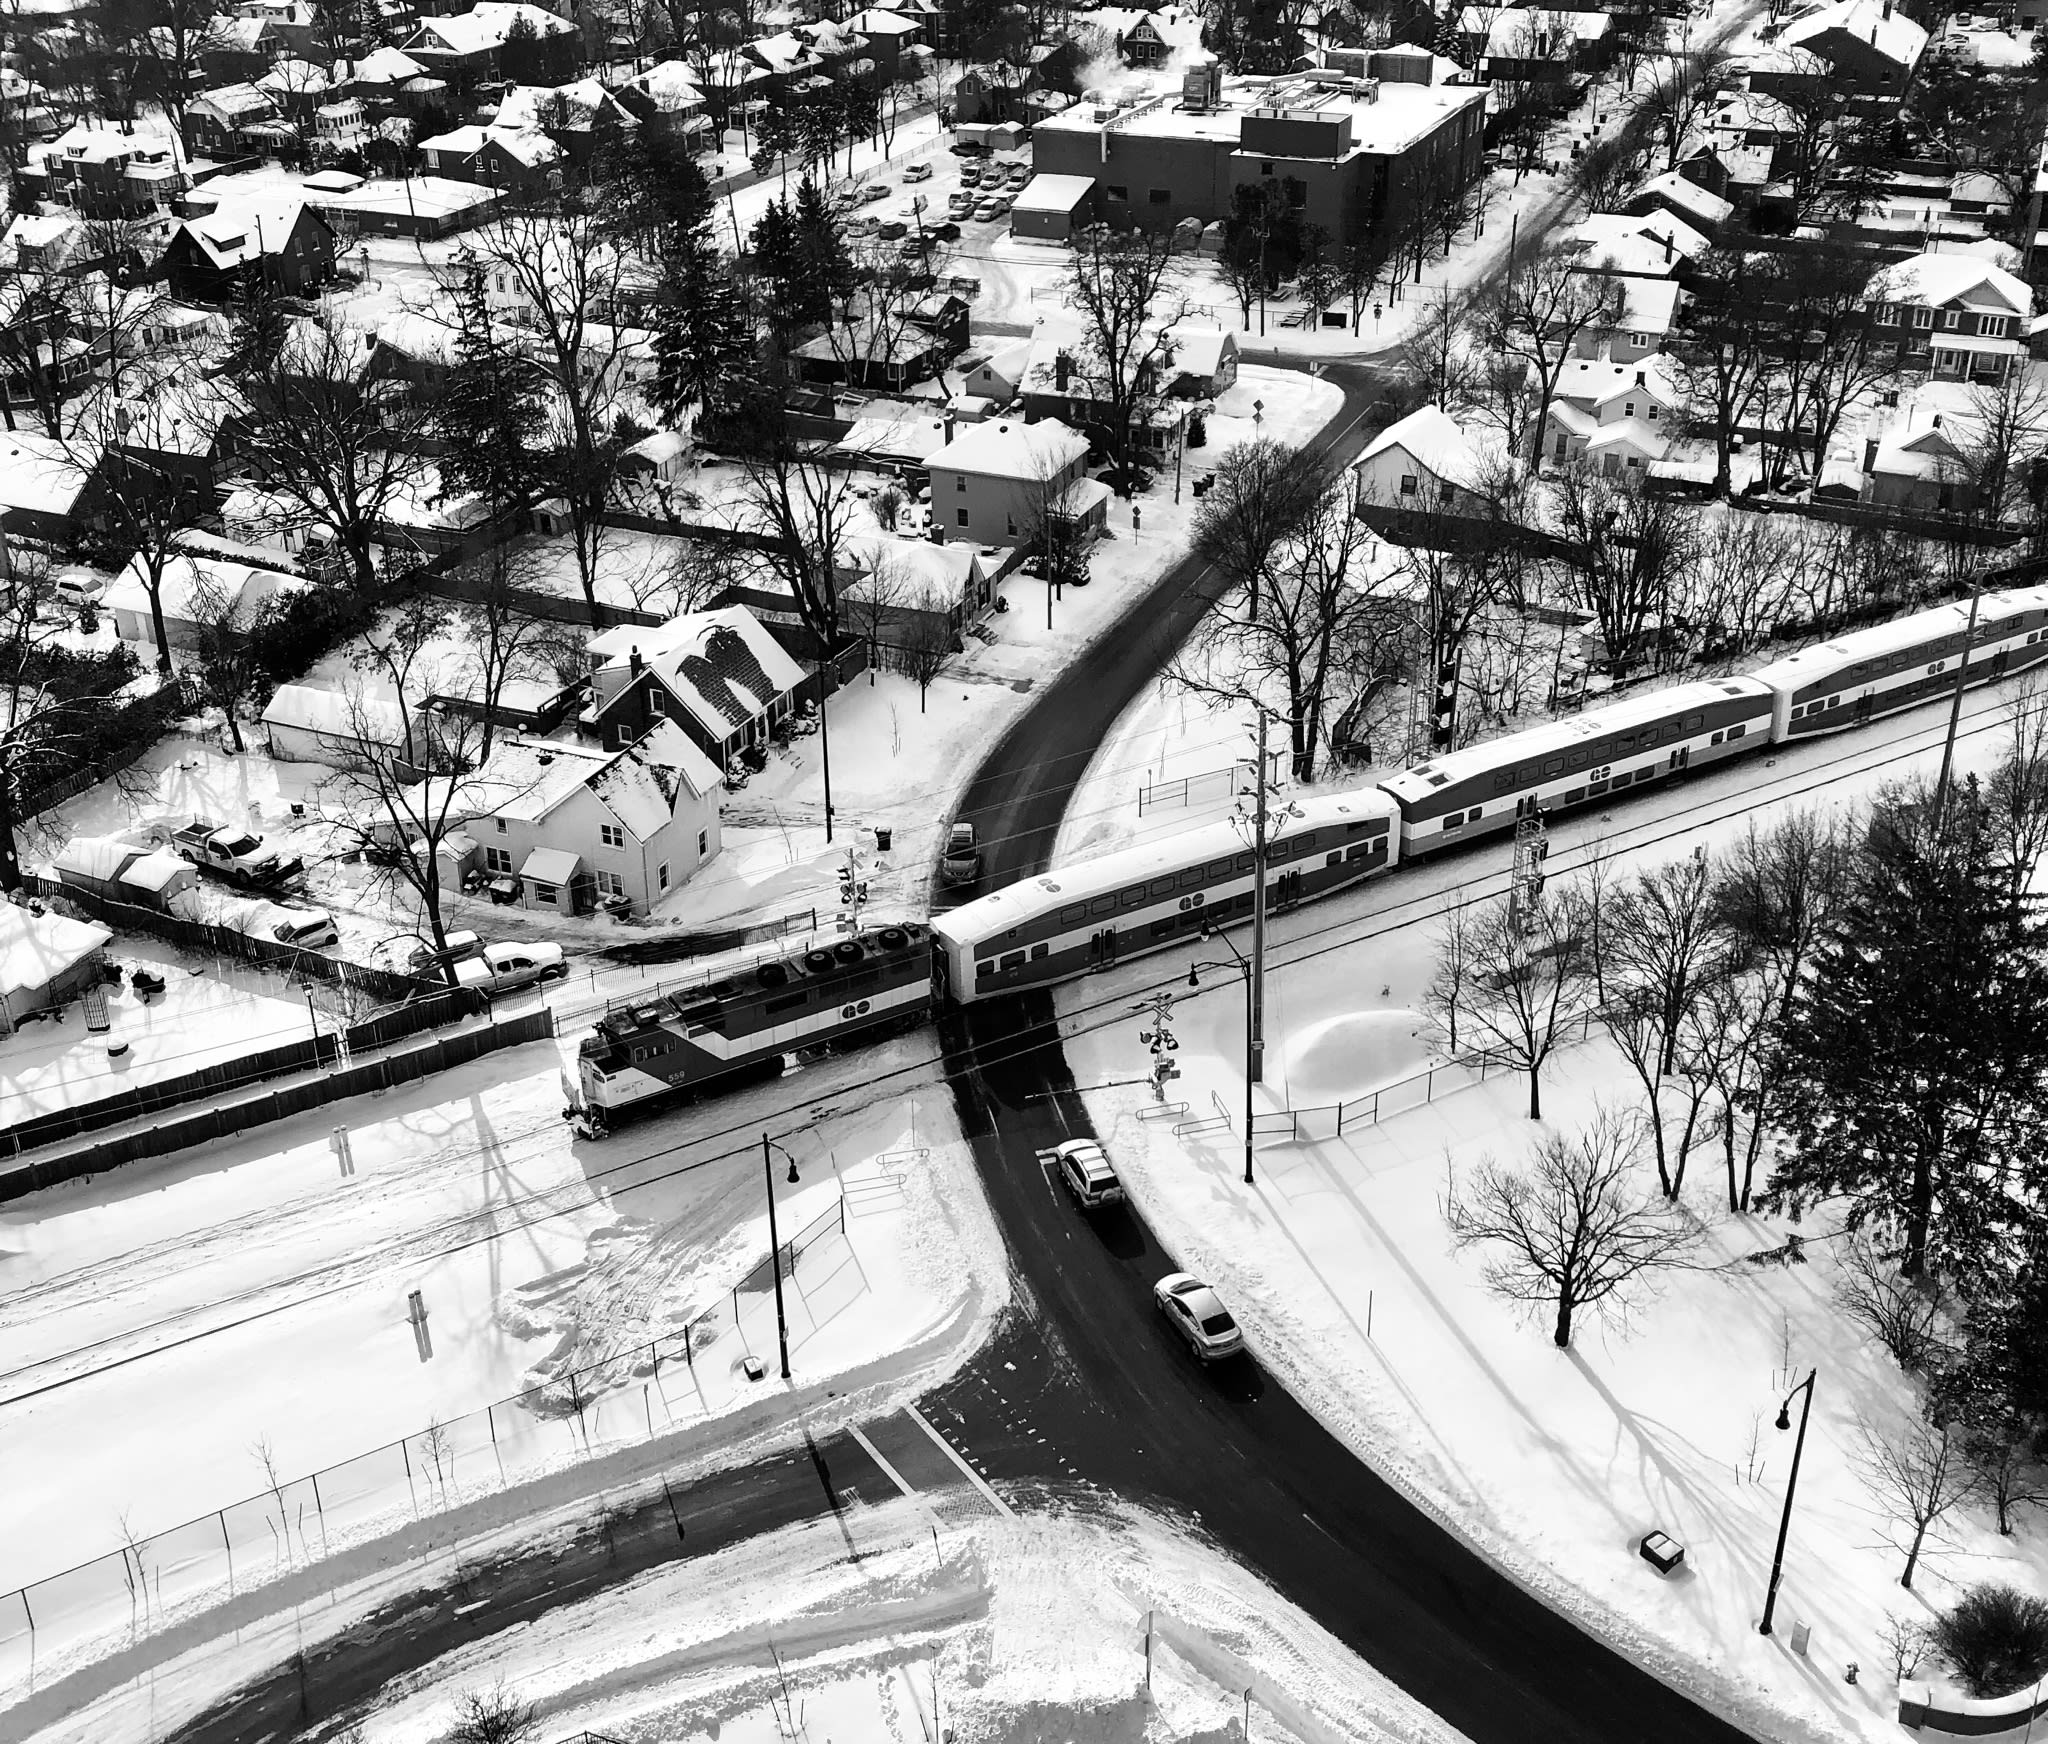 From high up in an apartment building, a GO train cuts across an intersection in Brampton. Snow c...